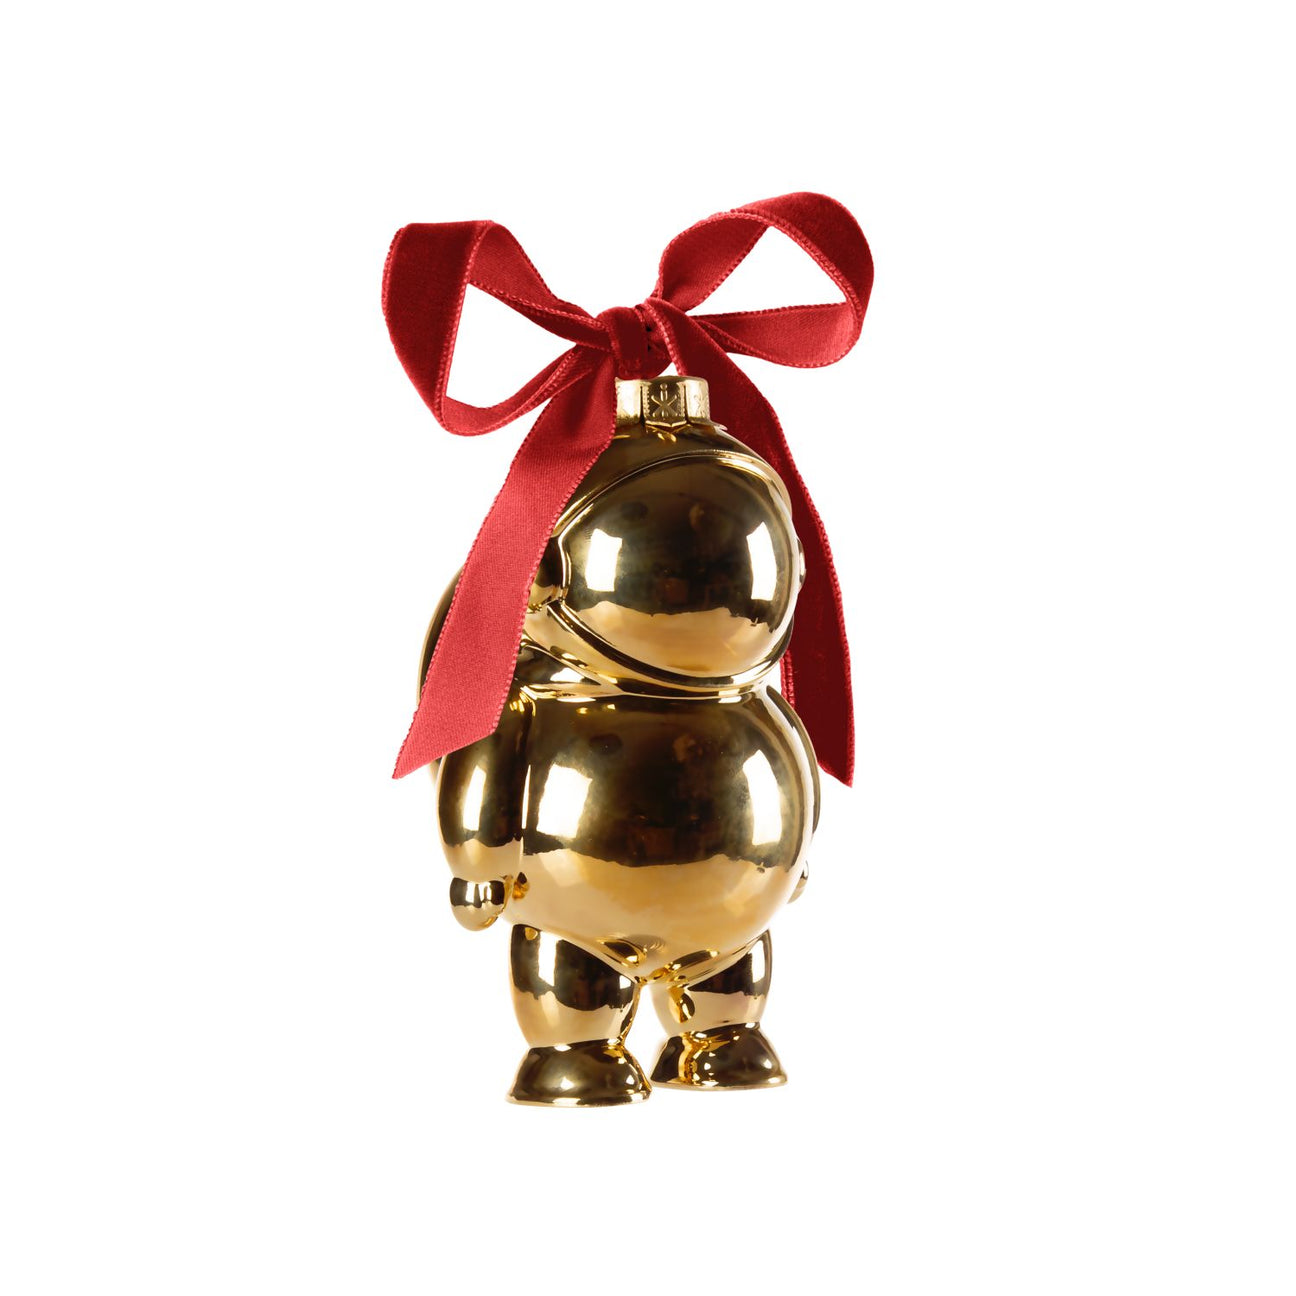 The Dreamer Christmas Bauble - Shiny Gold 